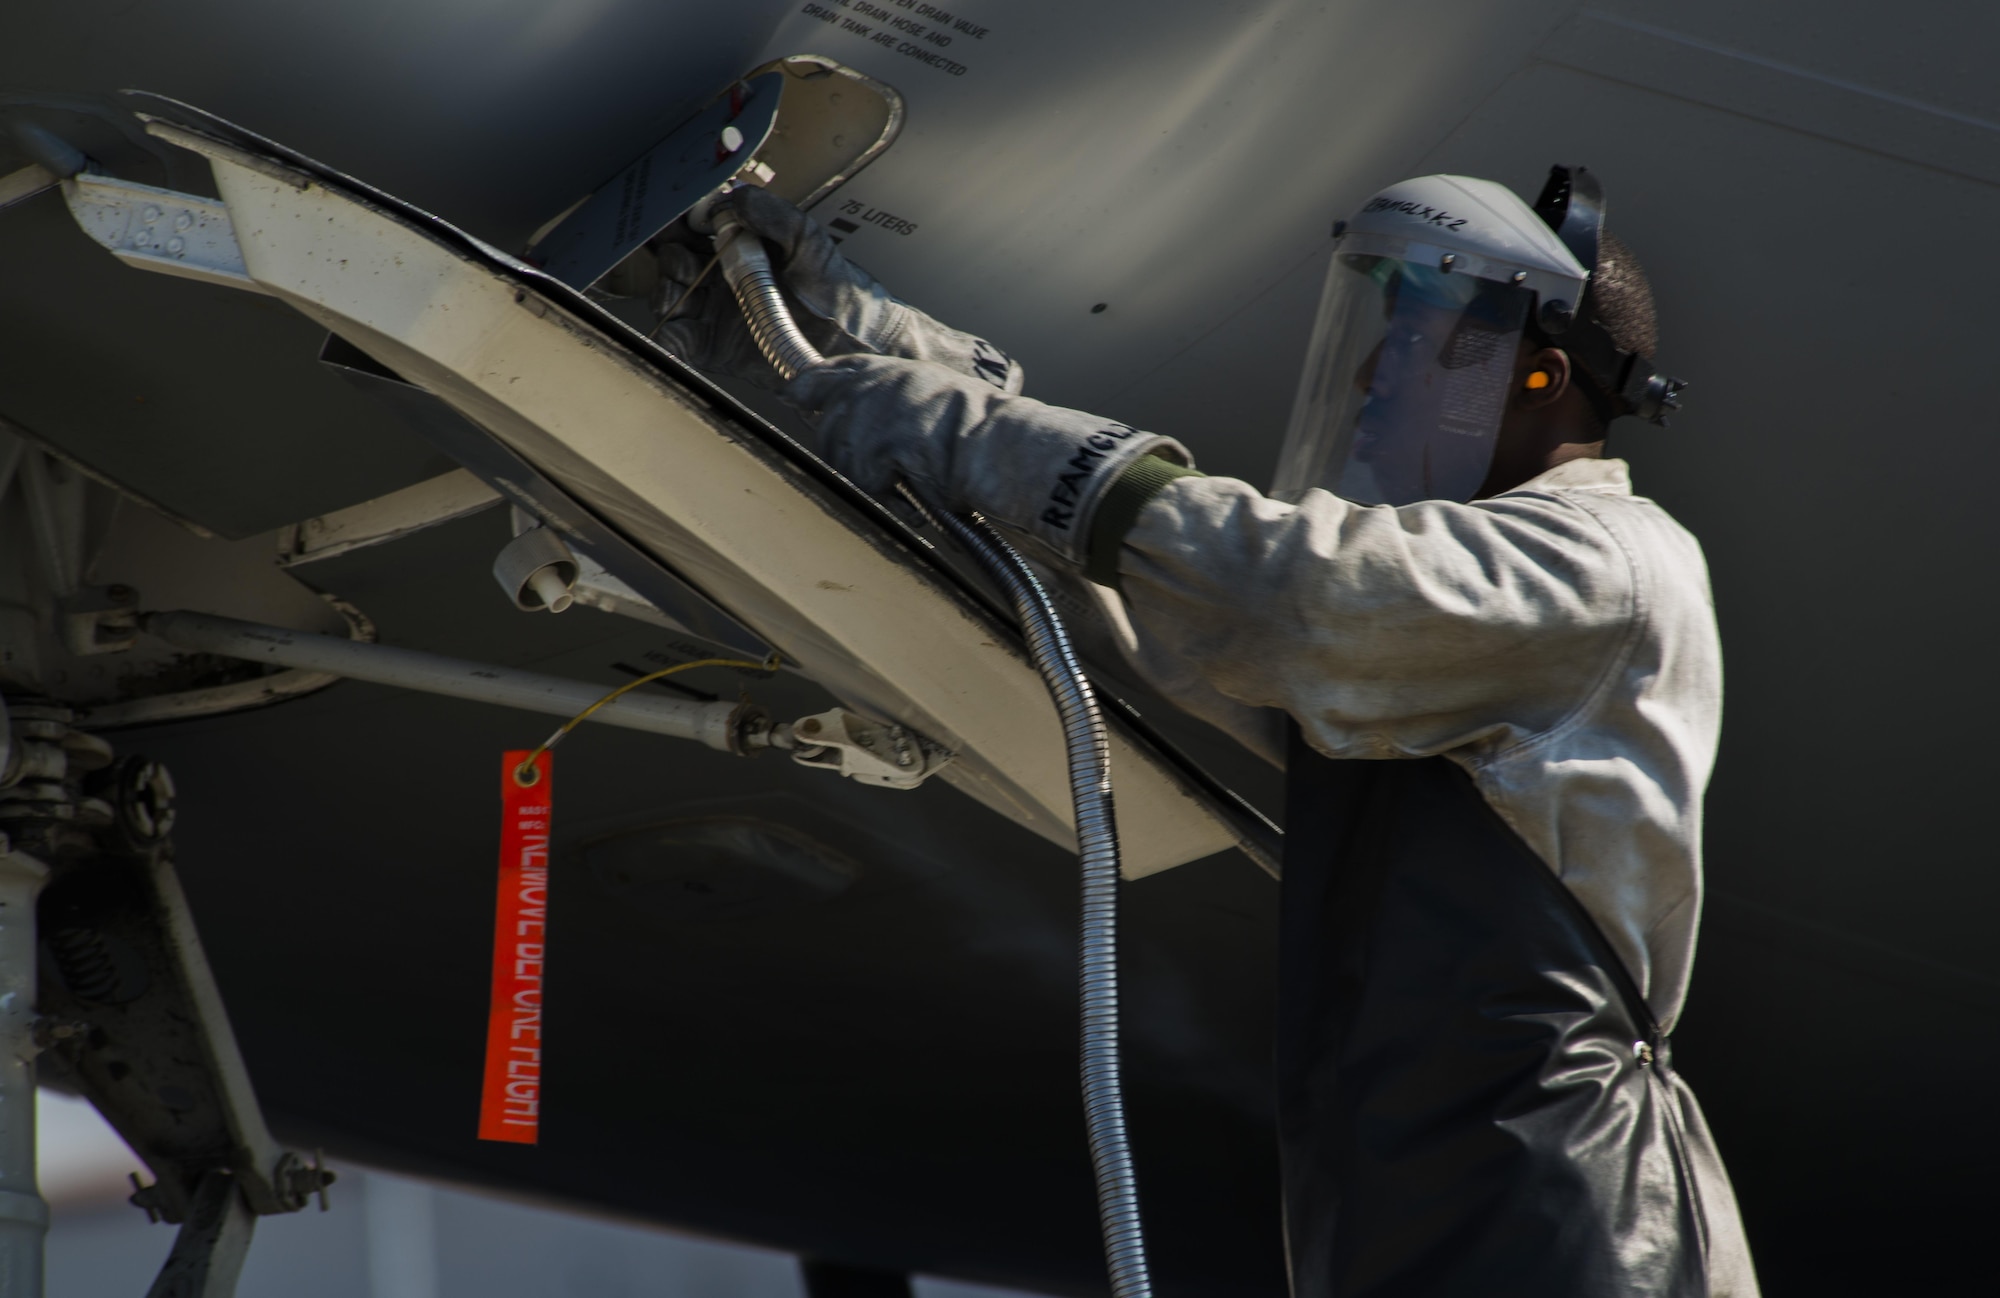 Senior Airman Christian Sharpe, 721st Aircraft Maintenance Squadron aerospace maintenance technician, attaches a hose to a C-17 Globemaster III Sept. 22, 106 at Ramstein Air Base, Germany. Sharpe was refilling the liquid oxygen in this aircraft, which is a source of breathing oxygen for pilots and aircrew at high altitudes. (U.S. Air Force photo/Senior Airman Tryphena Mayhugh)